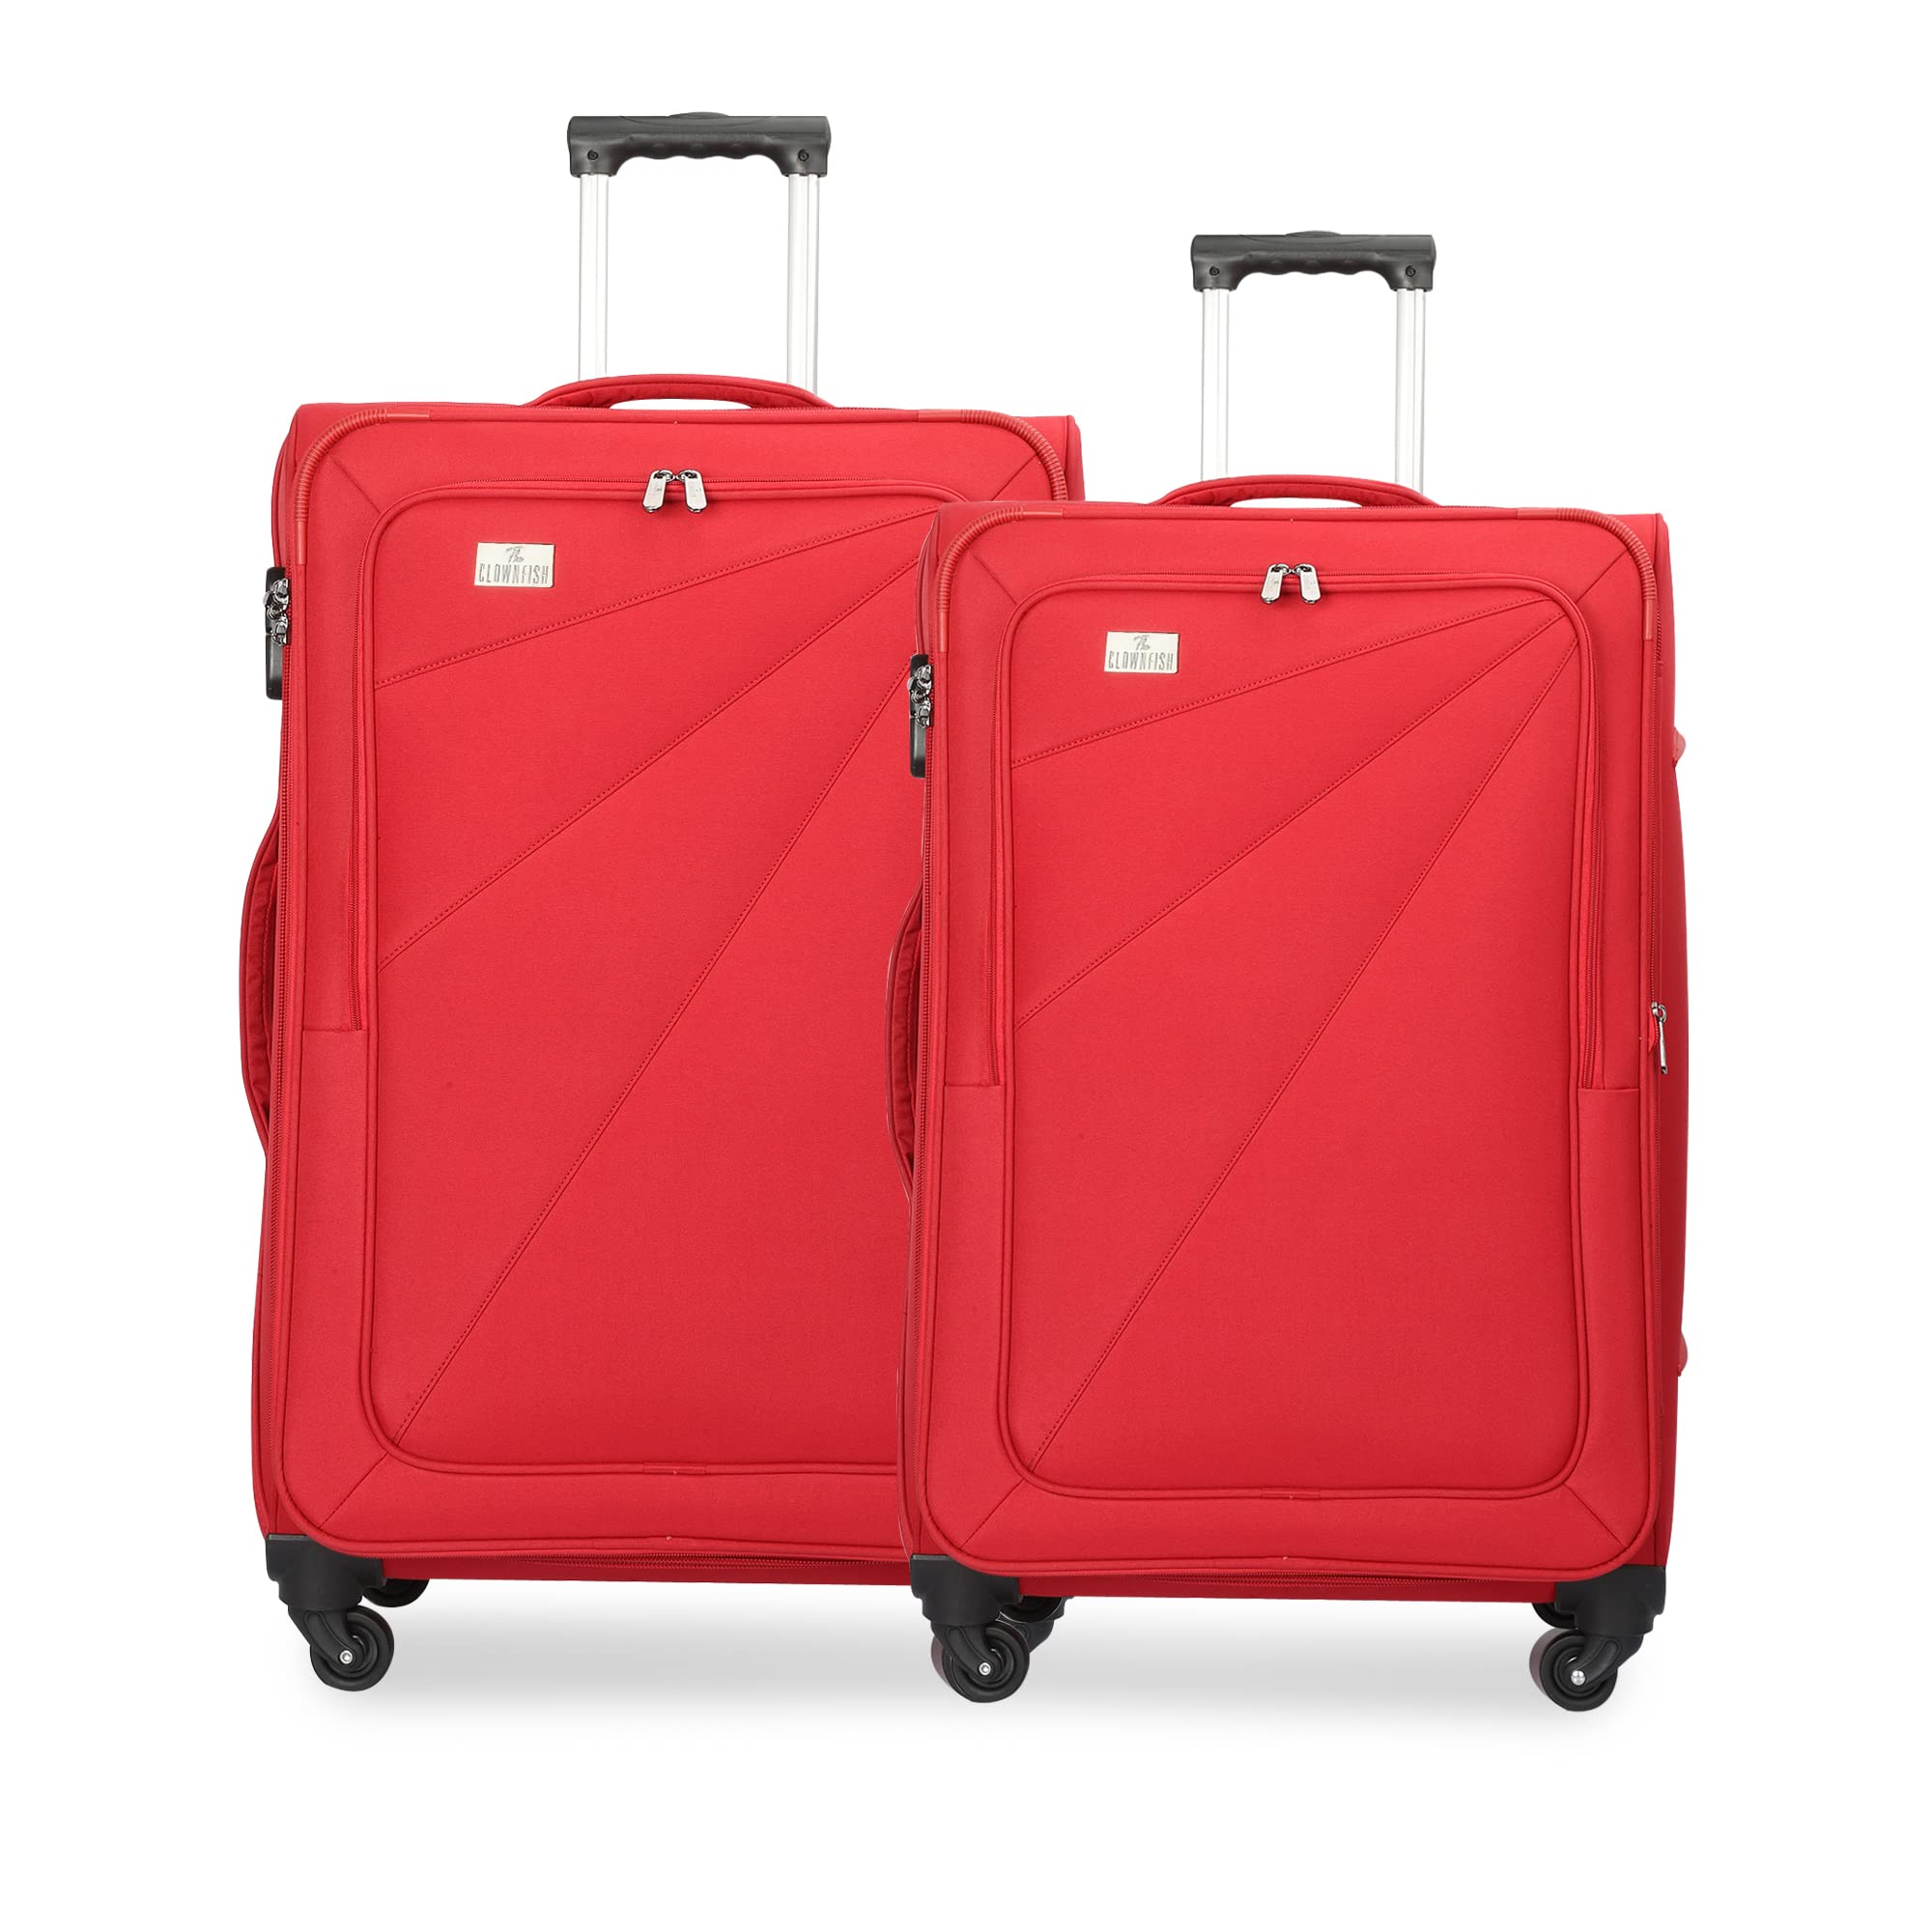 The Clownfish Combo of 2 Farren Series Luggage Polyester Softcase Suitcases Varied Sizes Four Wheel Trolley Bags - Red (68 cm, 56 cm)